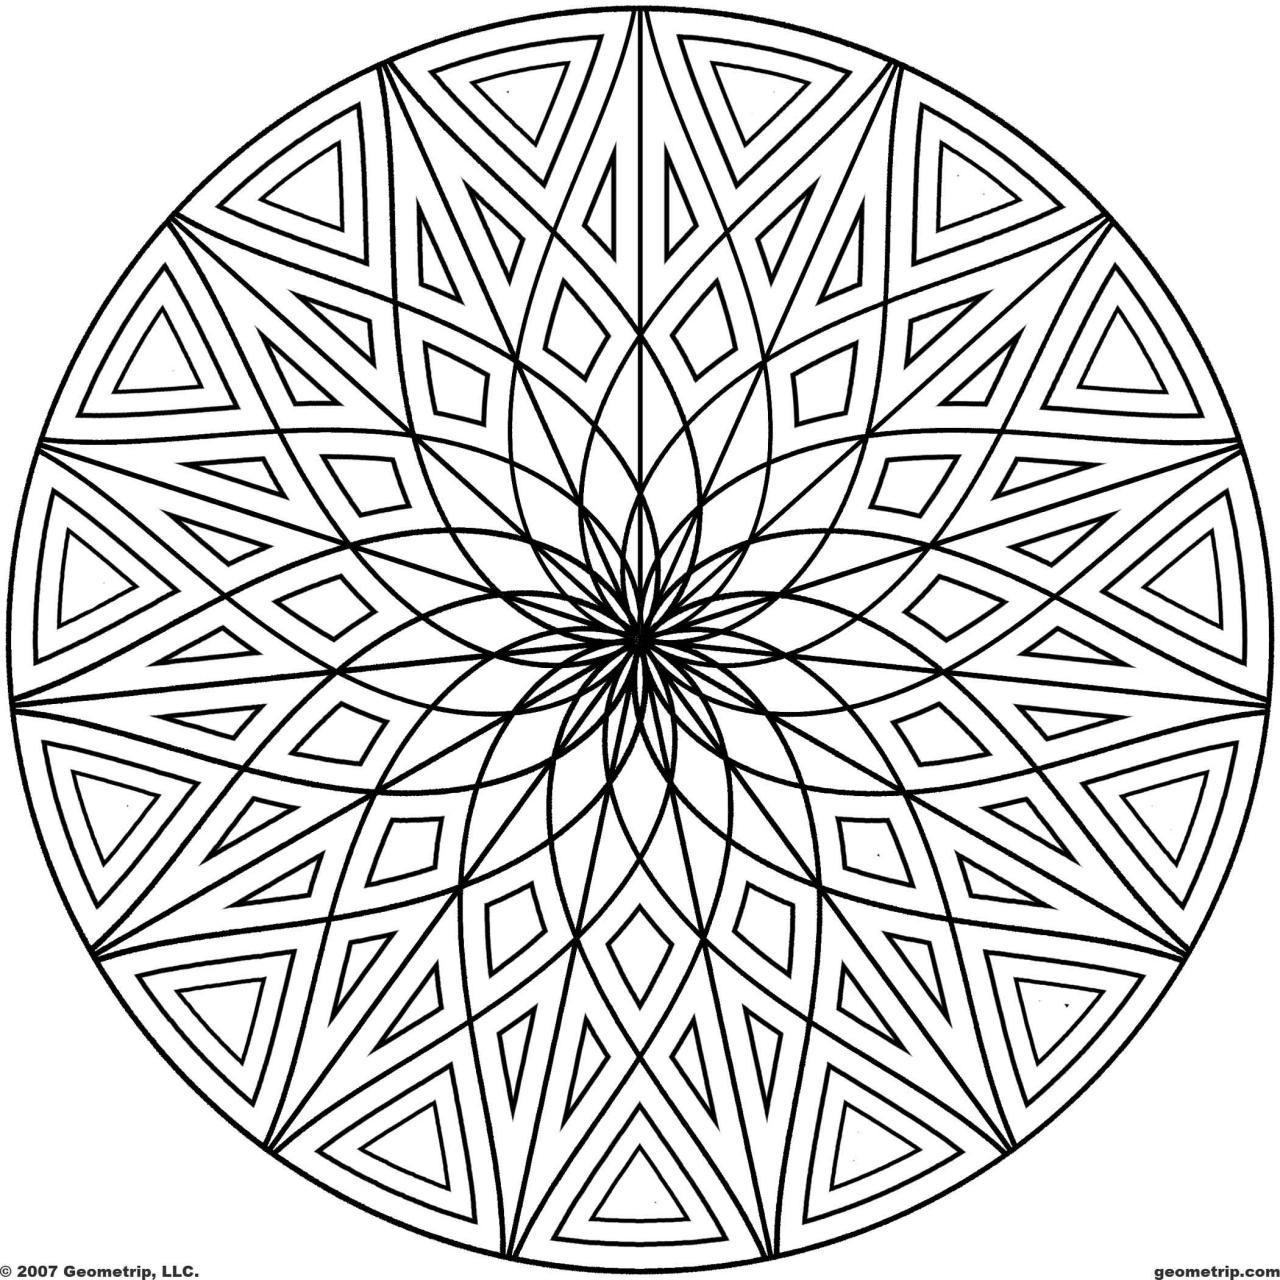 Design Coloring Pages
 Cool Designs To Color Coloring Pages Coloring Page For